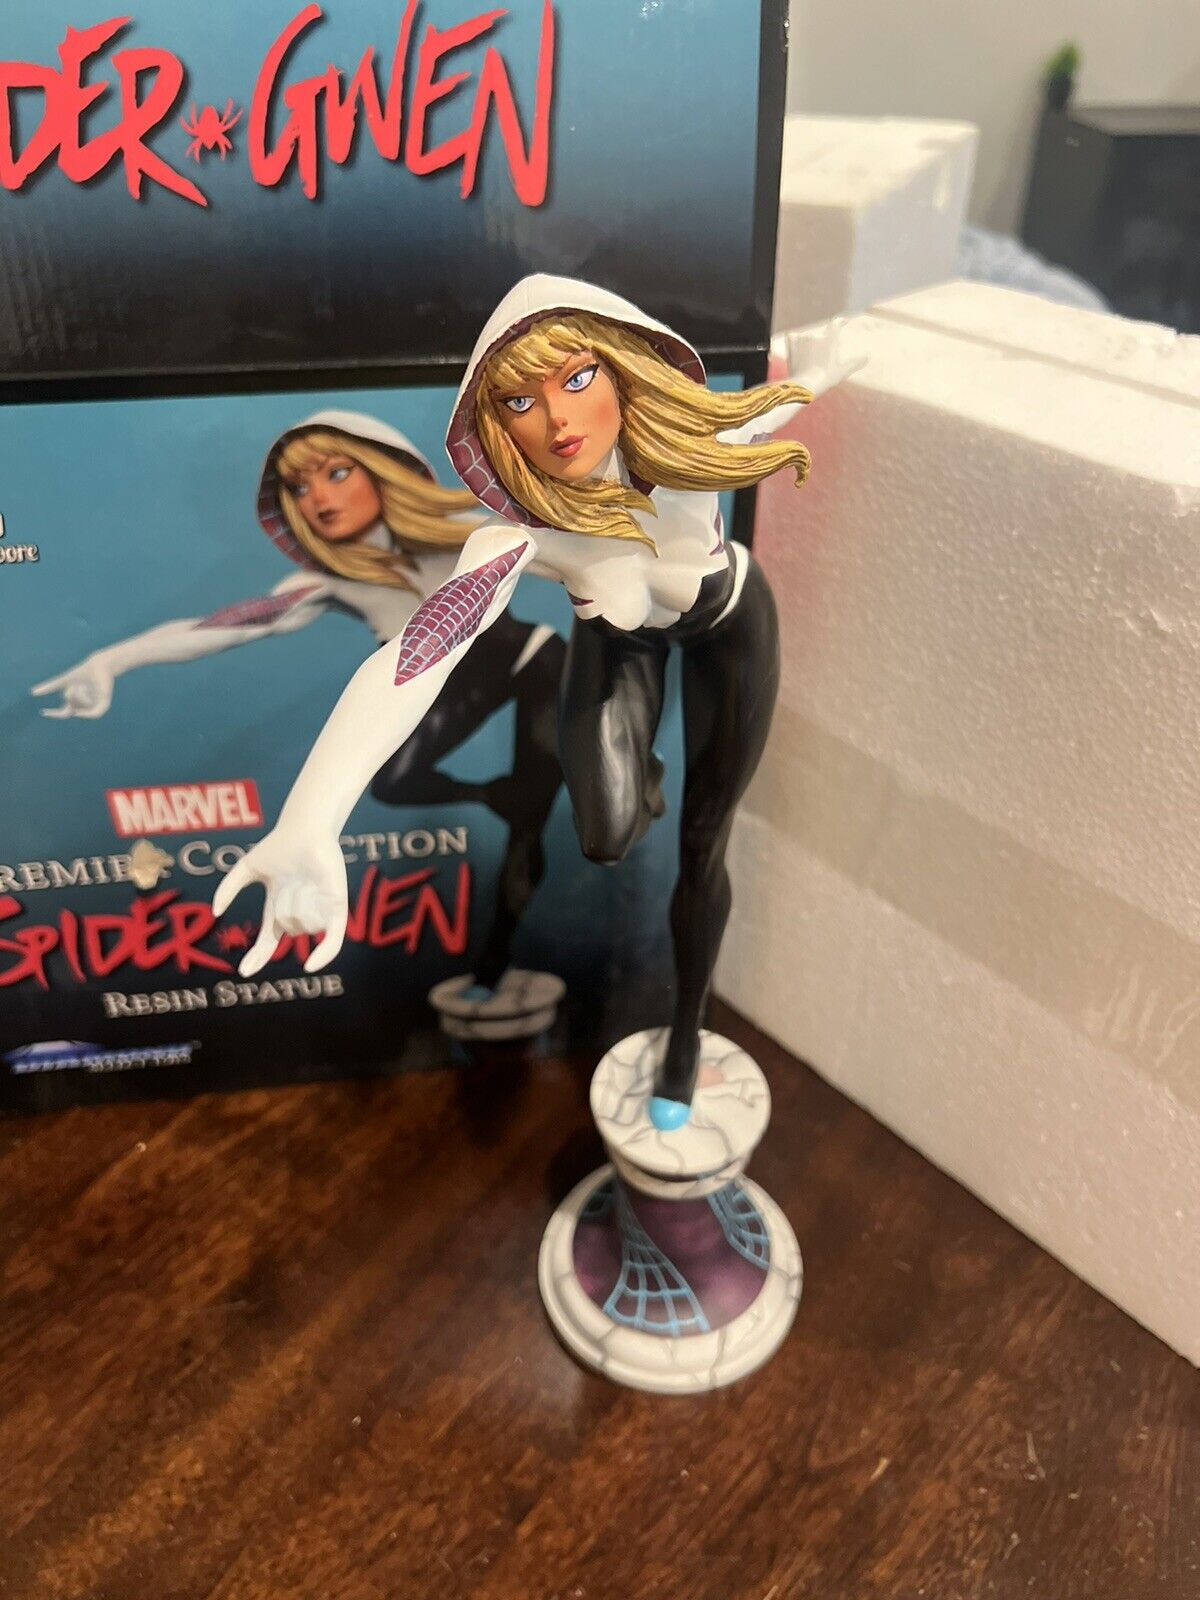 Diamond Select Marvel Premier Collection Spider-Gwen Resin Statue